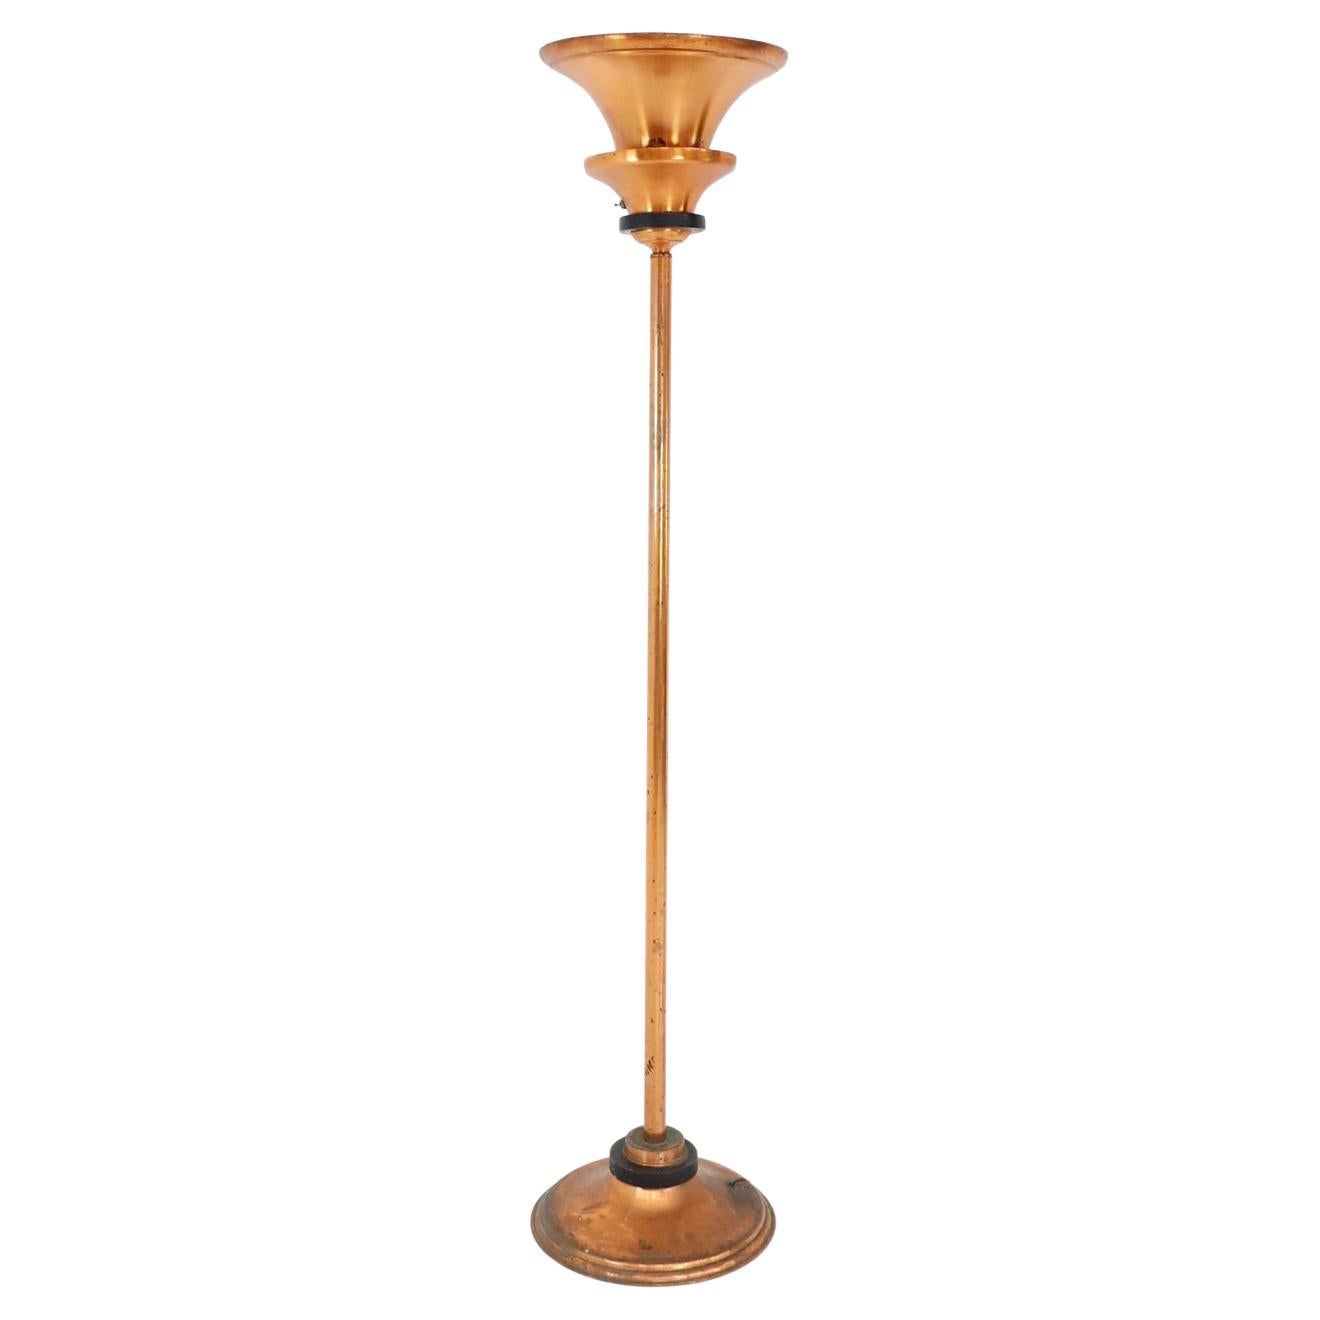 Art Deco Torchiere Floor Lamp Made in Cooper and Wood Details, 1920s For Sale